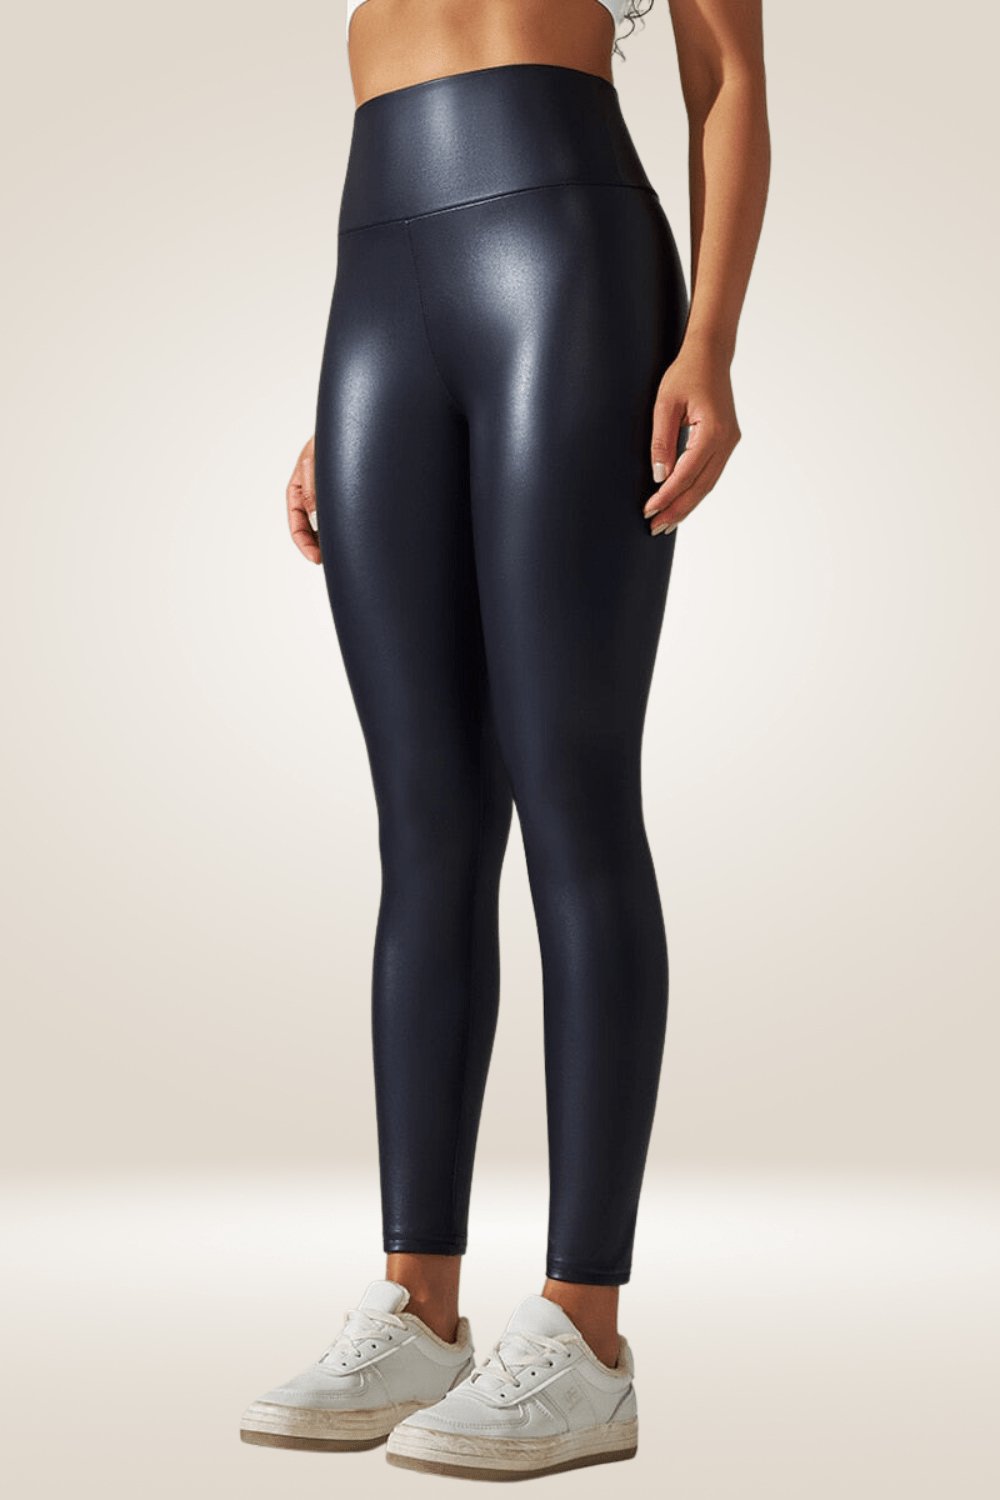 Glossy Faux Leather High Waisted Legging – KCoutureBoutique